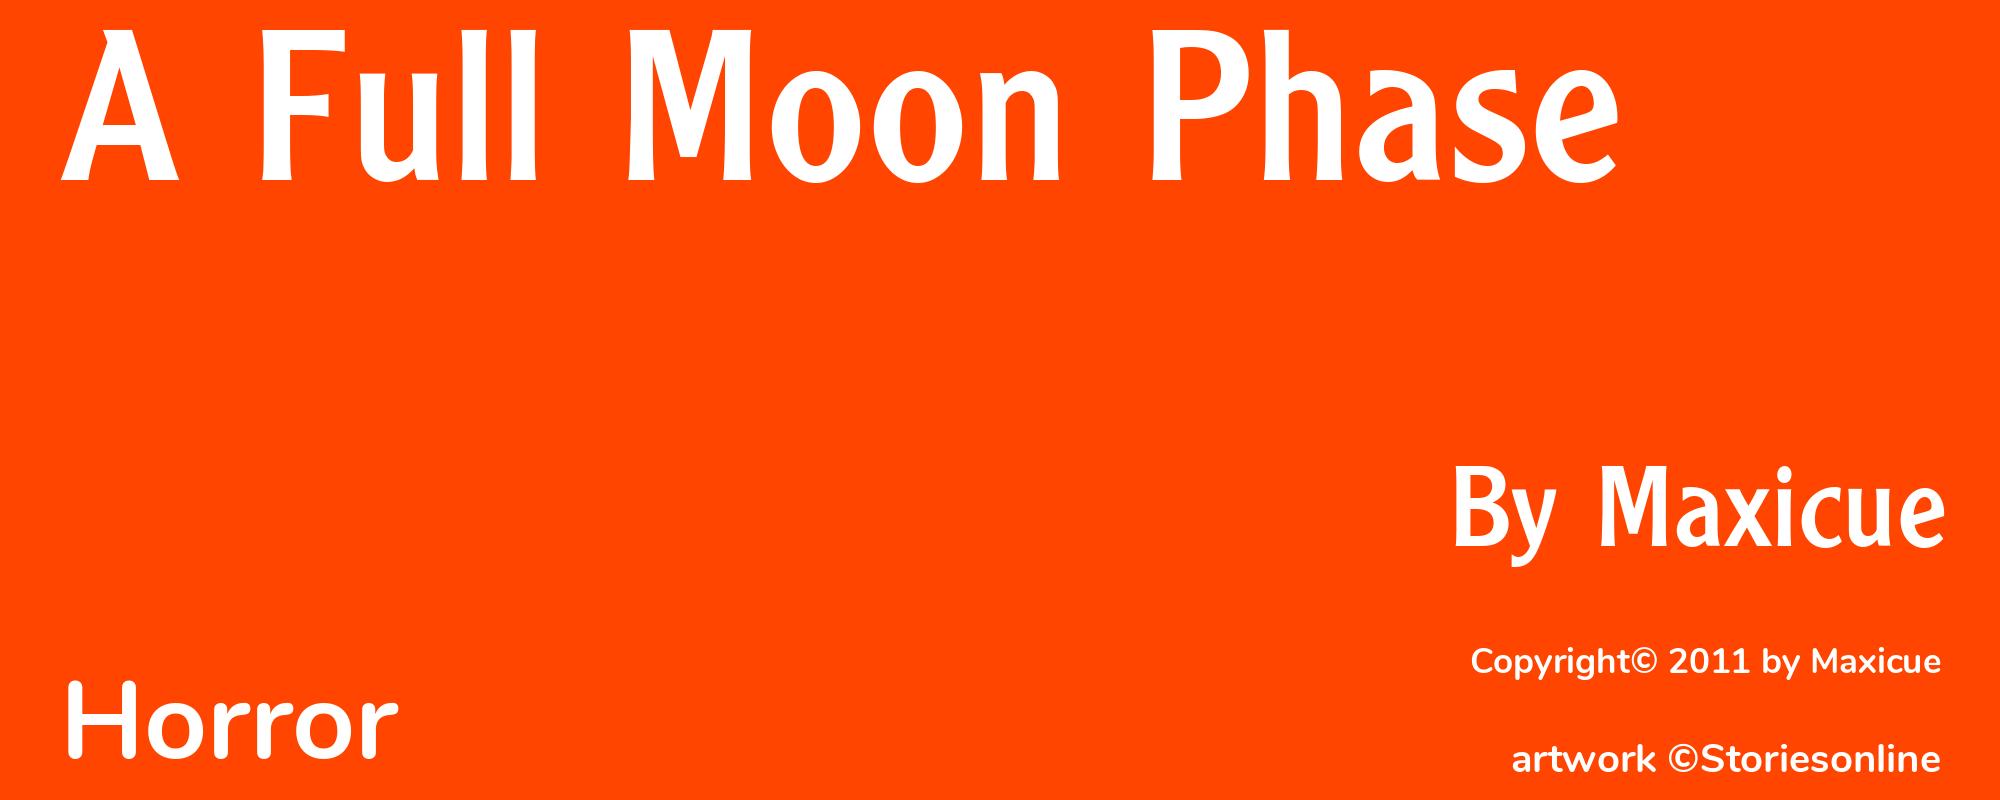 A Full Moon Phase - Cover